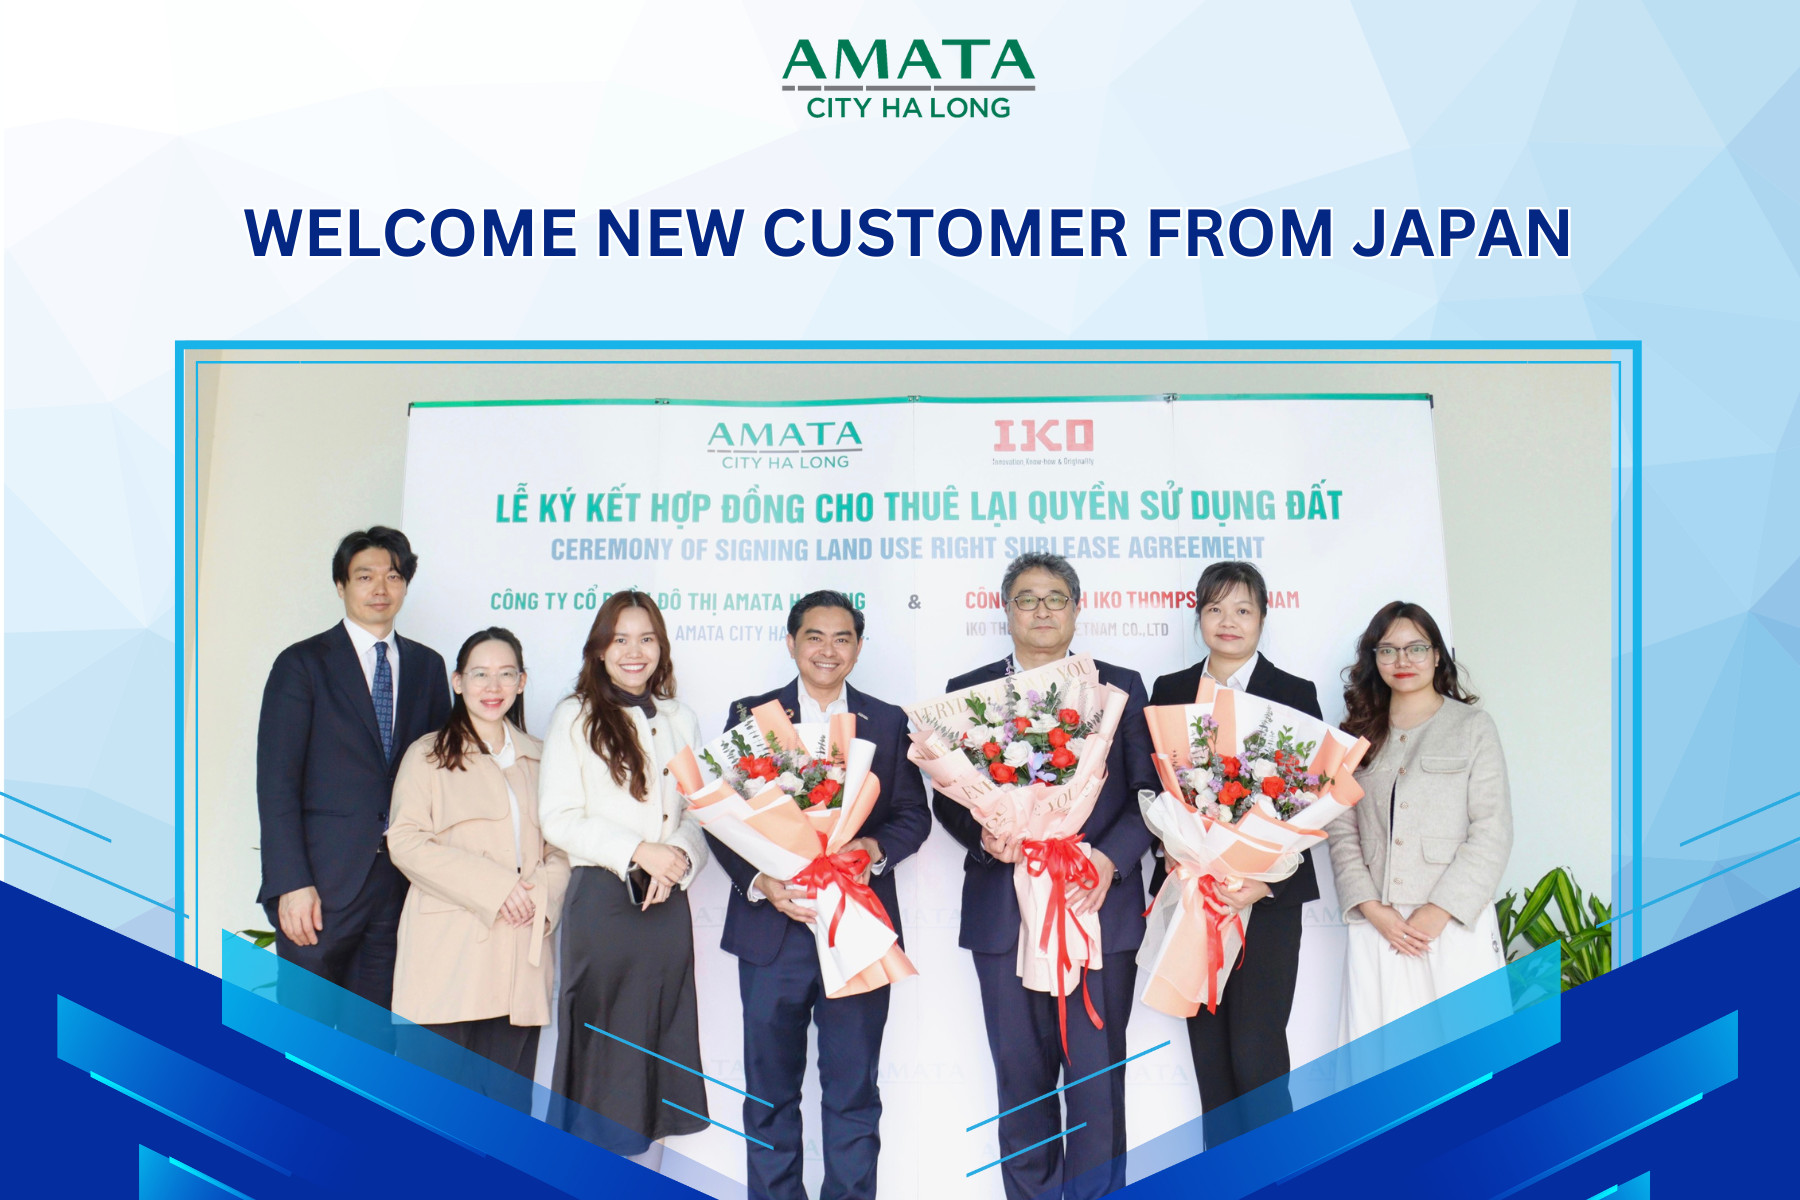 AMATA welcome new customer from Japan